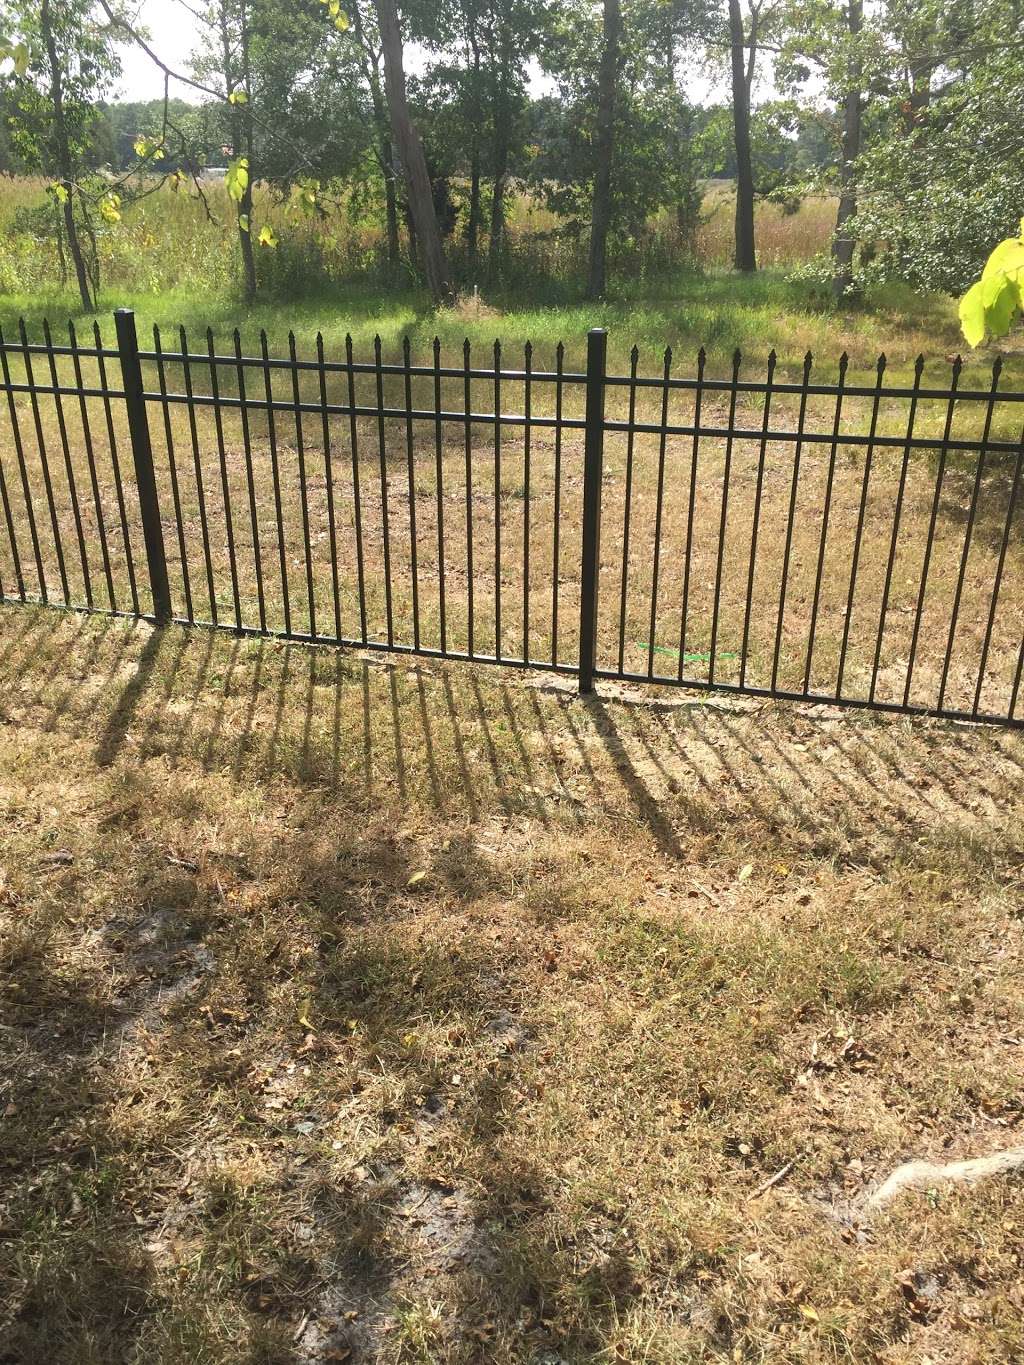 Master Wire Manufacturing and Fence Company | 3000, 1019 E Black Horse Pike, Hammonton, NJ 08037 | Phone: (609) 567-1616